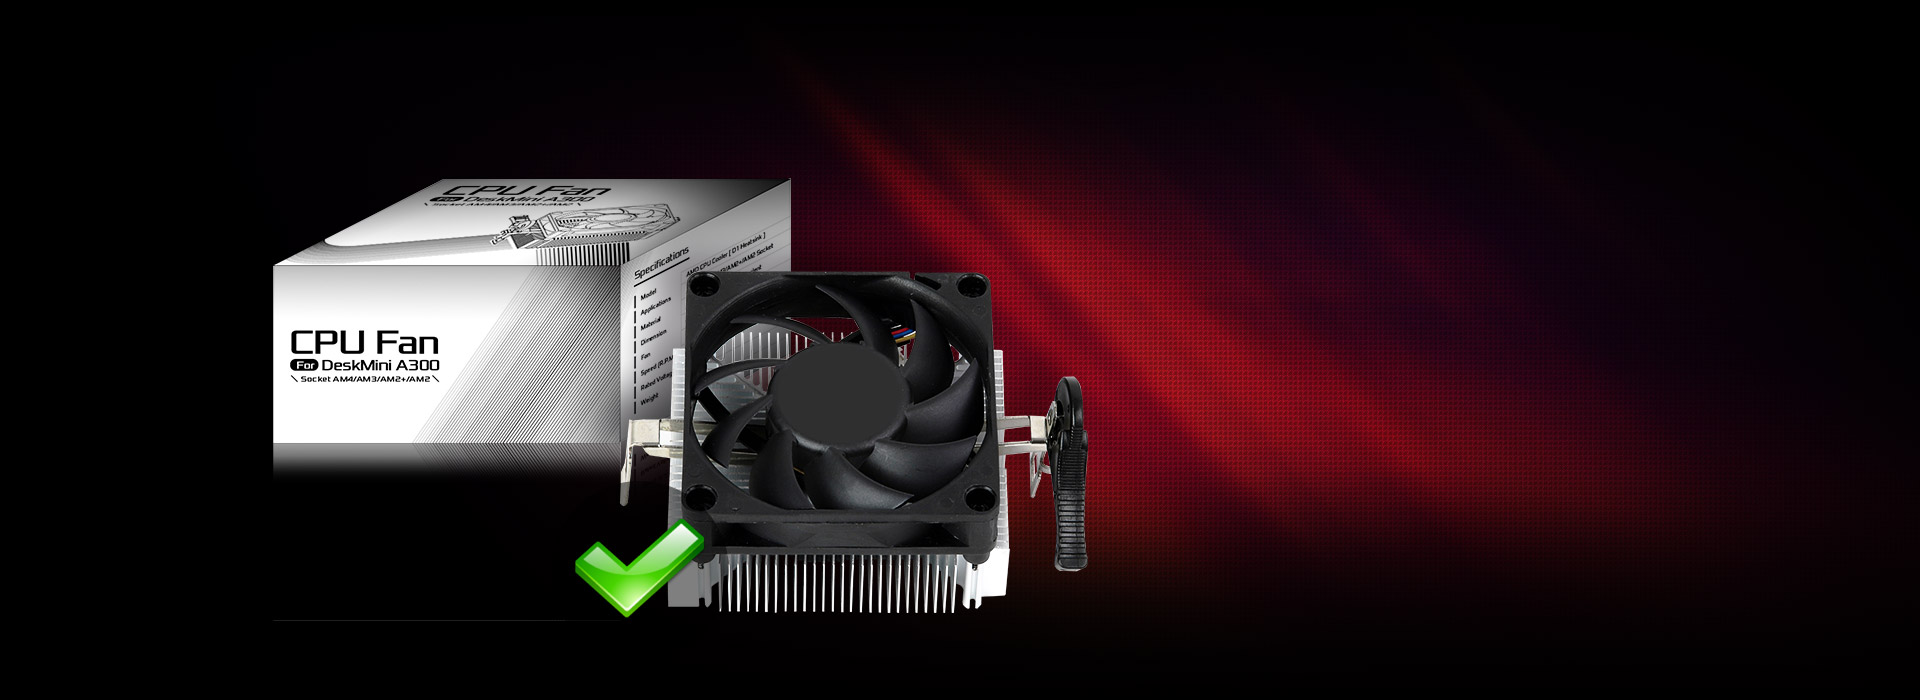 The DeskMini A300's optional CPU fan and its product box